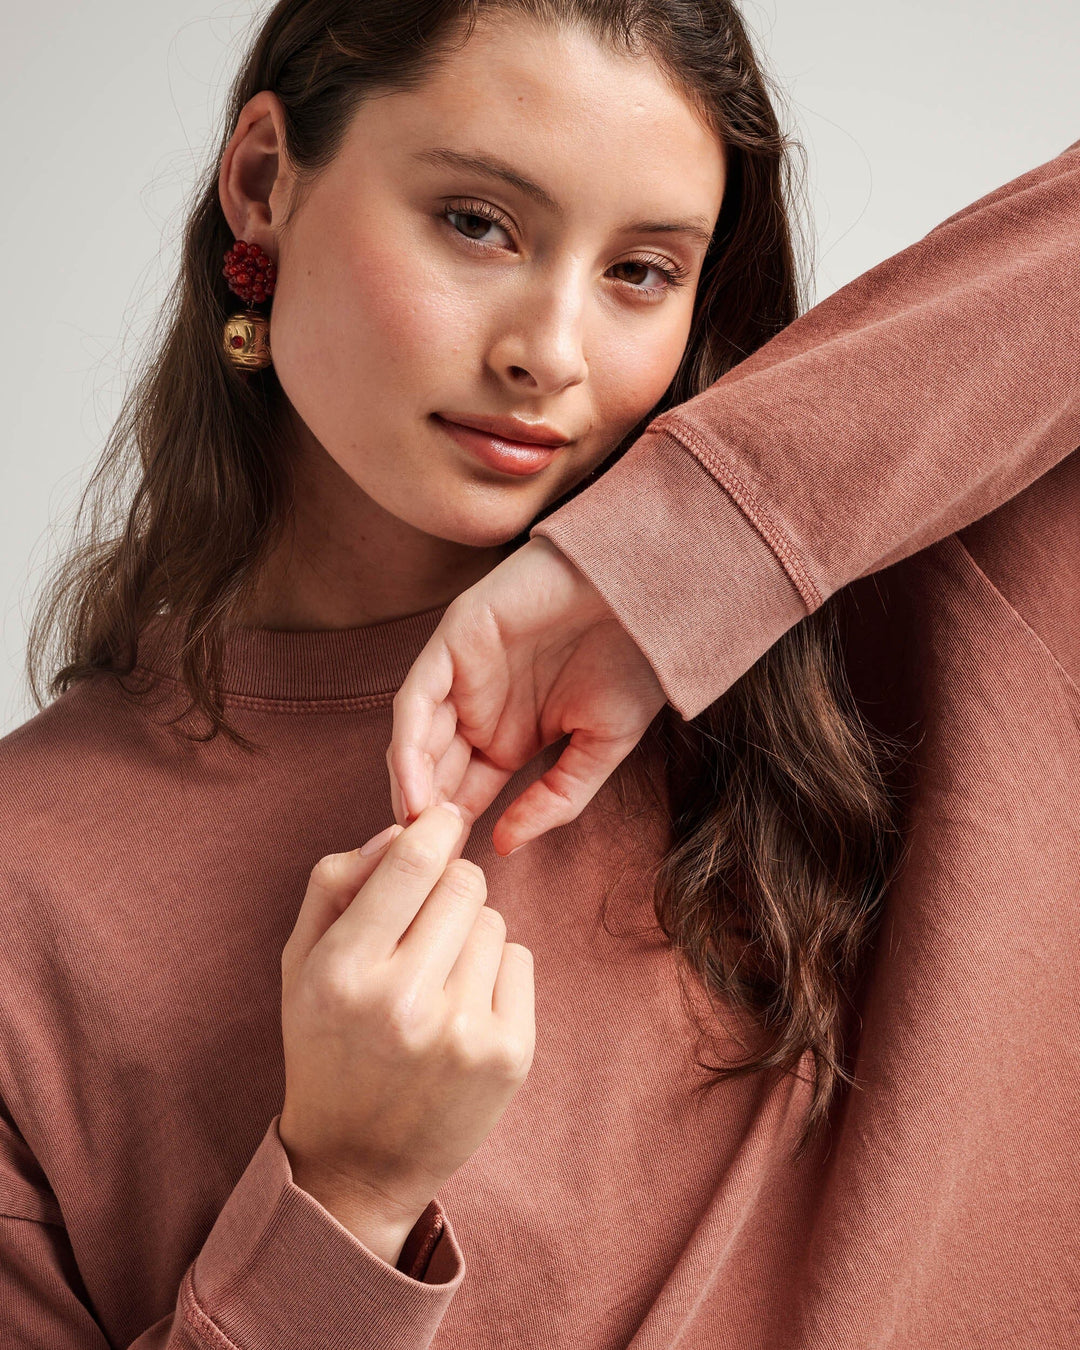 Relaxed Crop LS- Russet